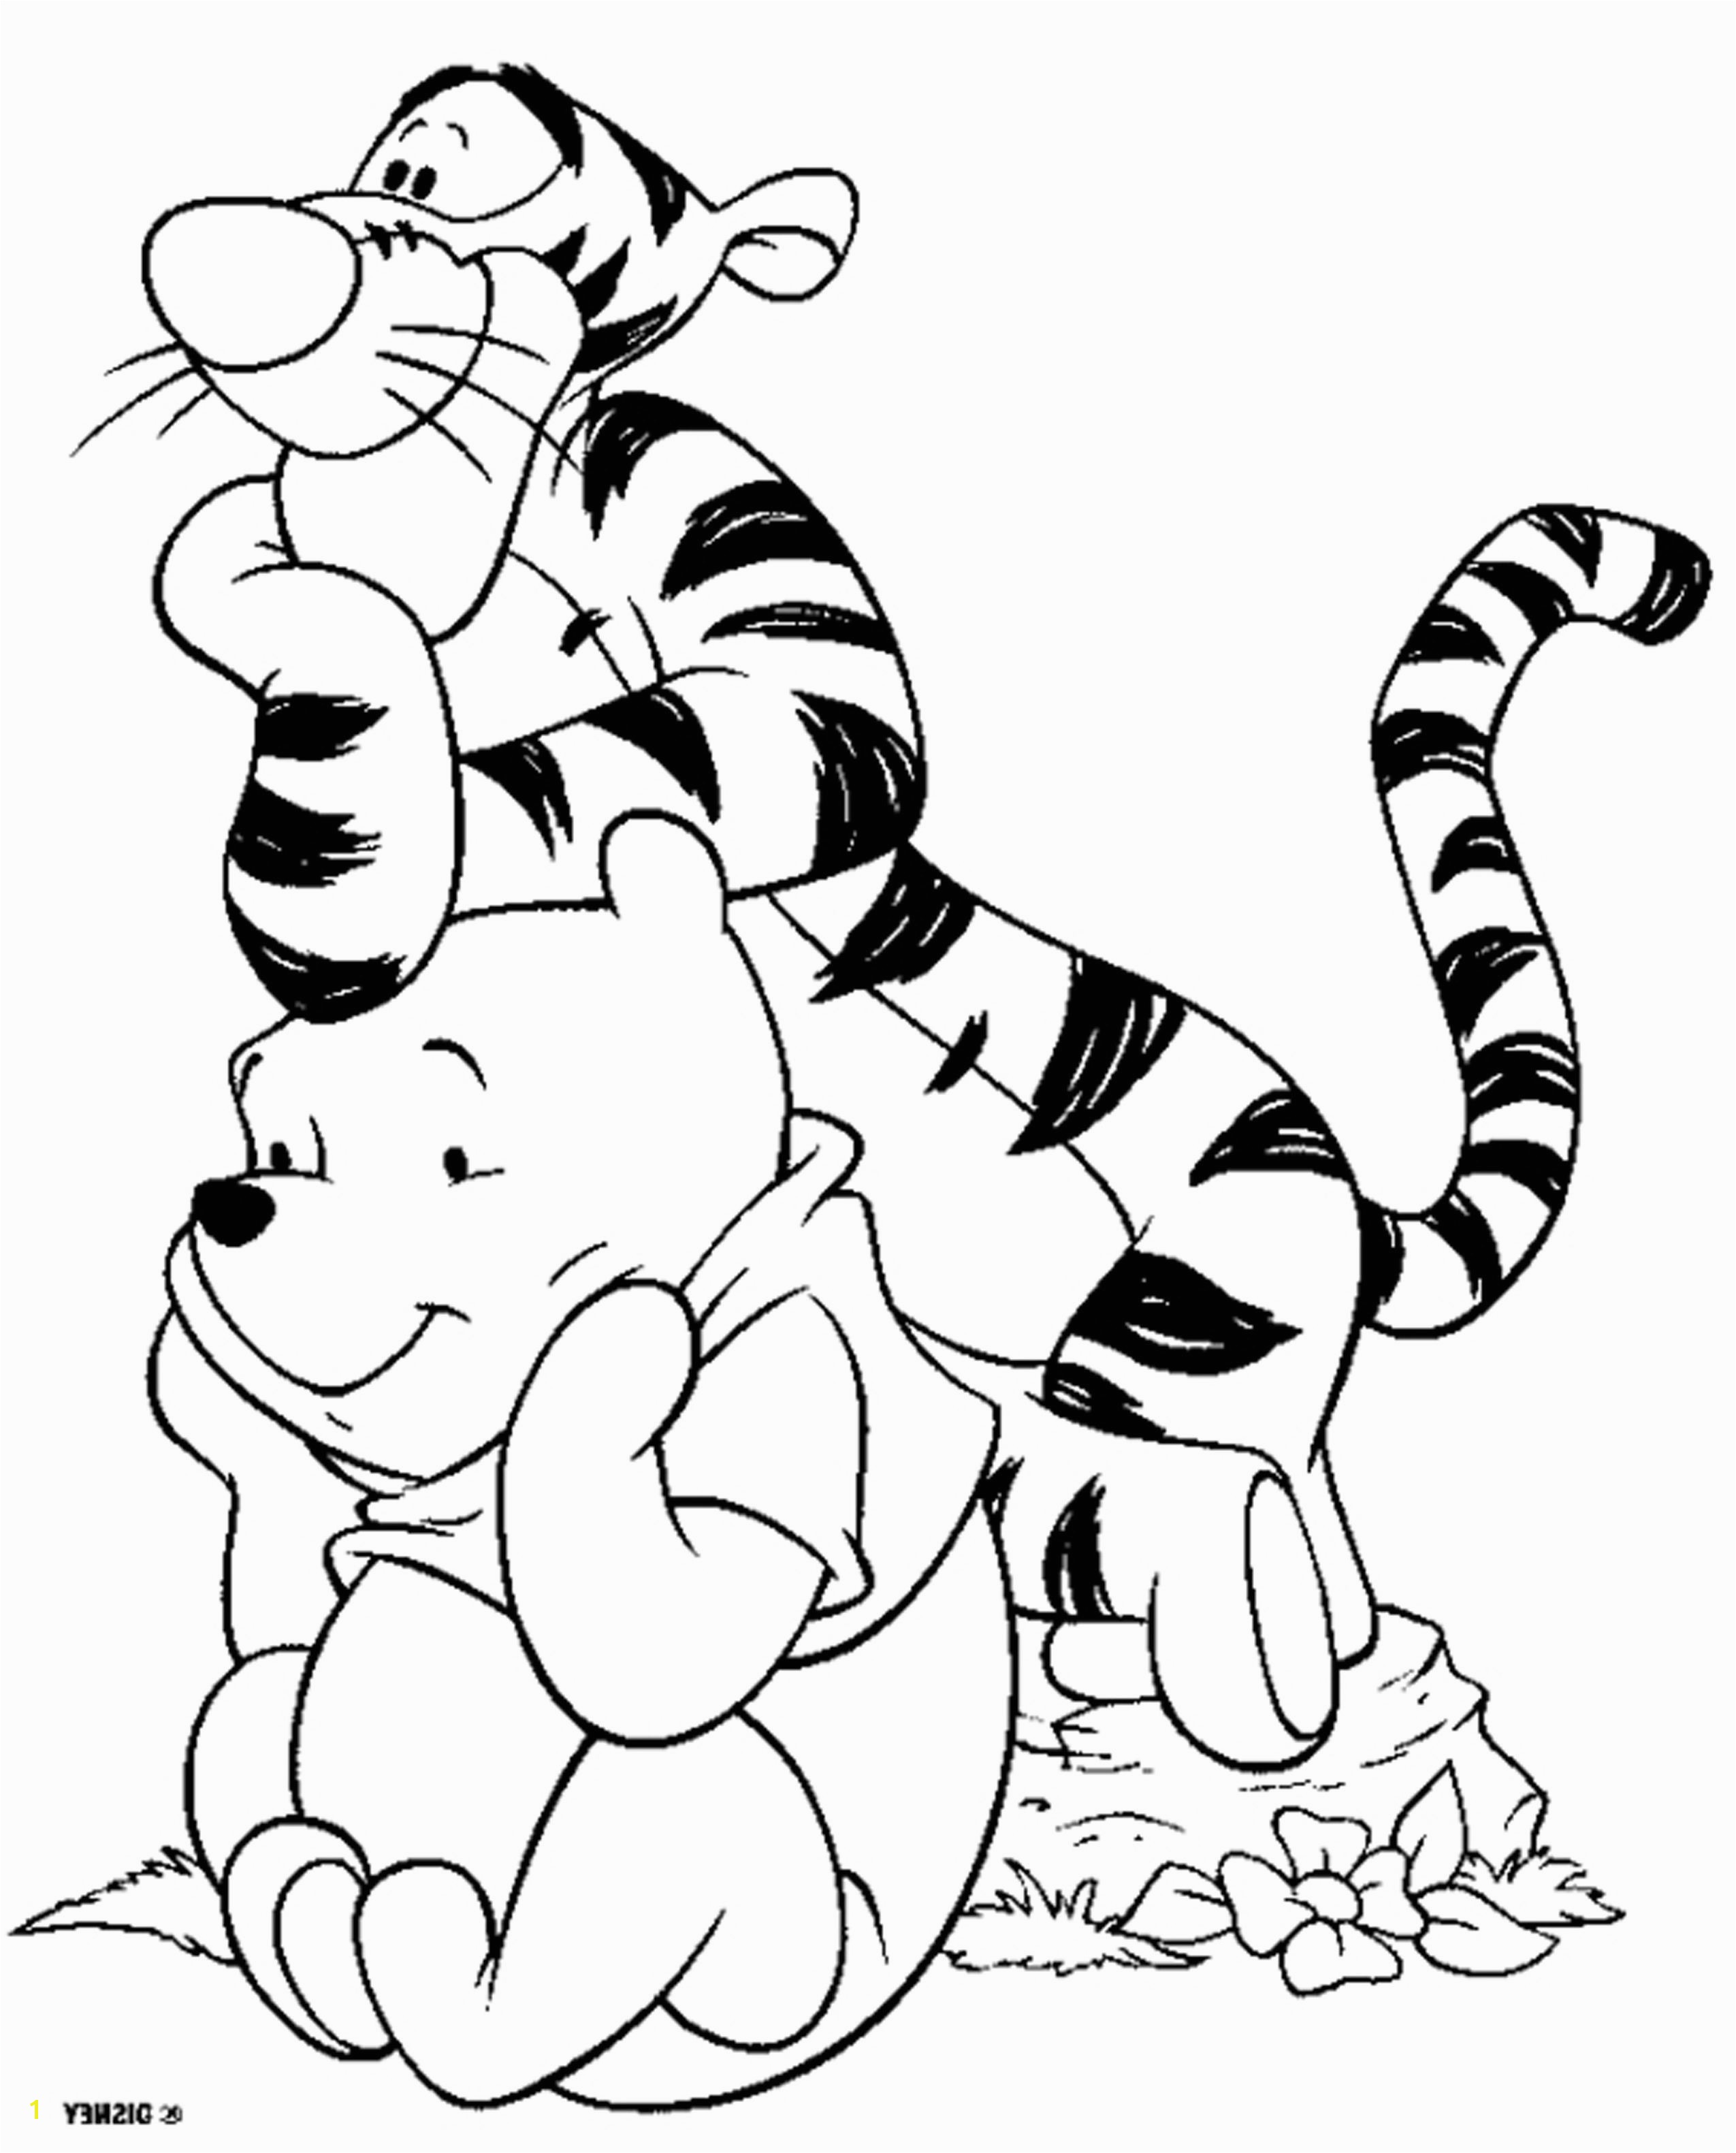 Orlando Magic Coloring Pages Inspirational 18new Free Disney Coloring Pages Clip Arts & Coloring Pages graph